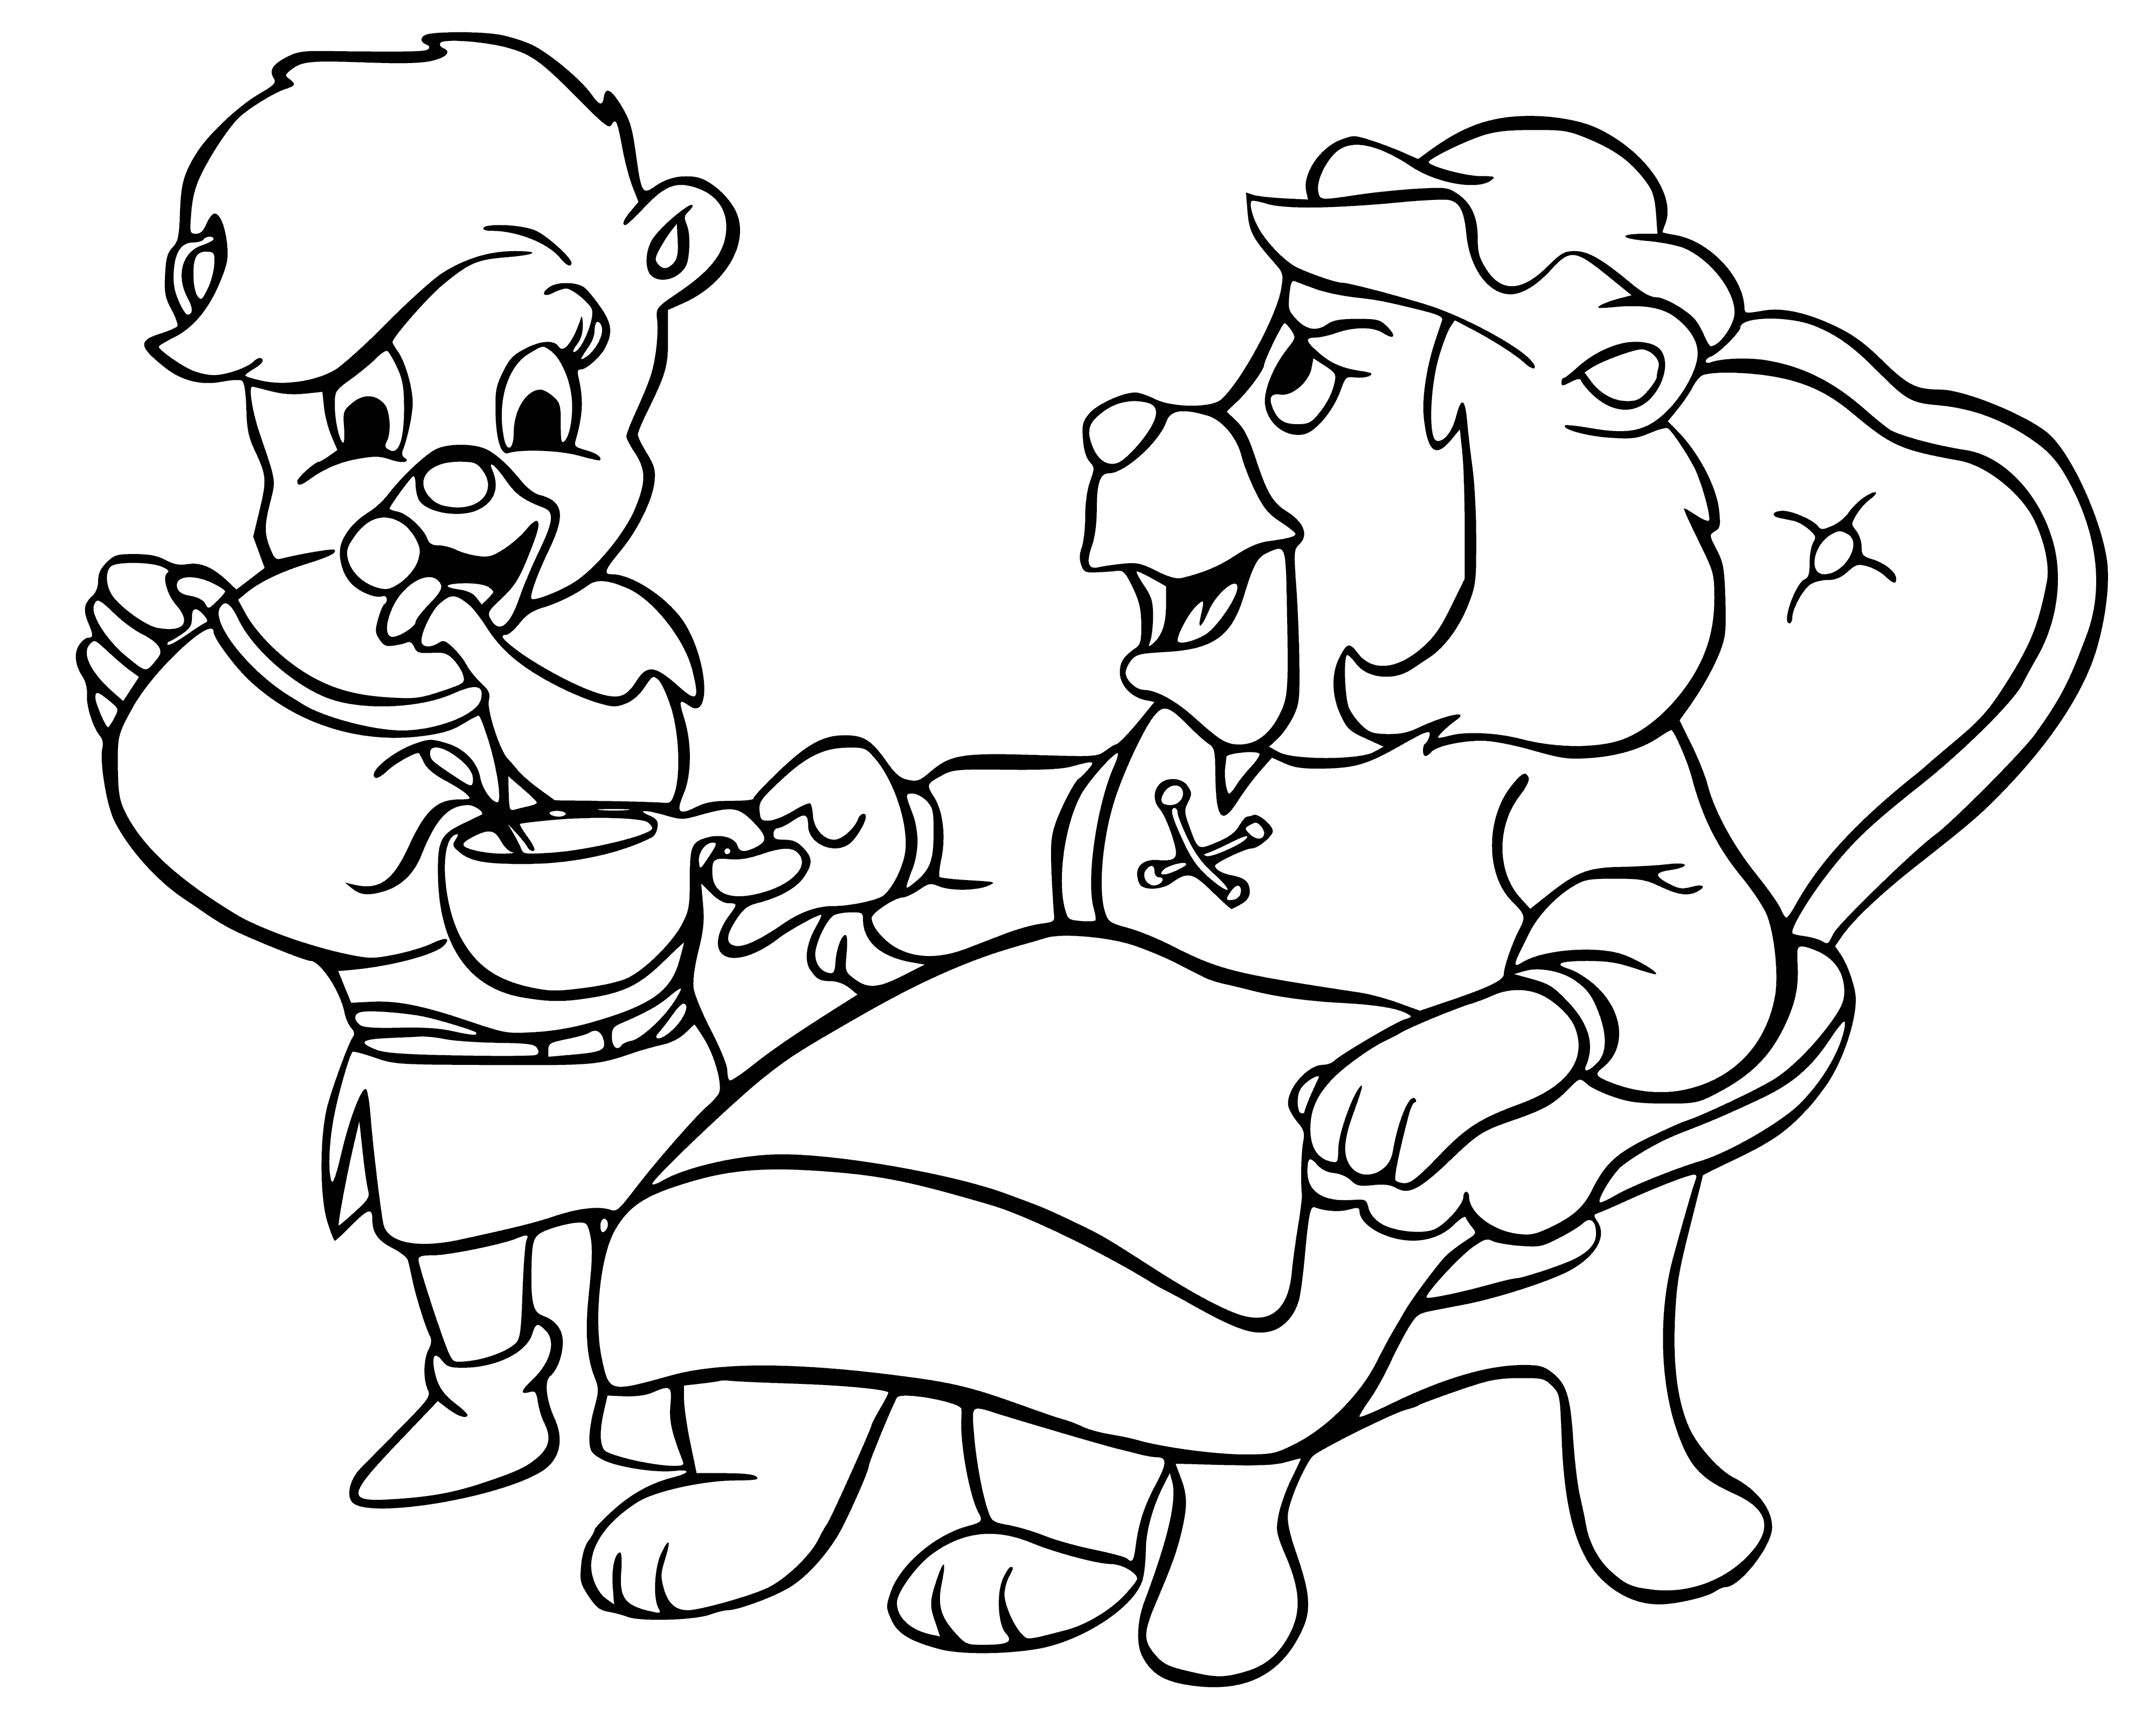 Gummy Bears coloring page